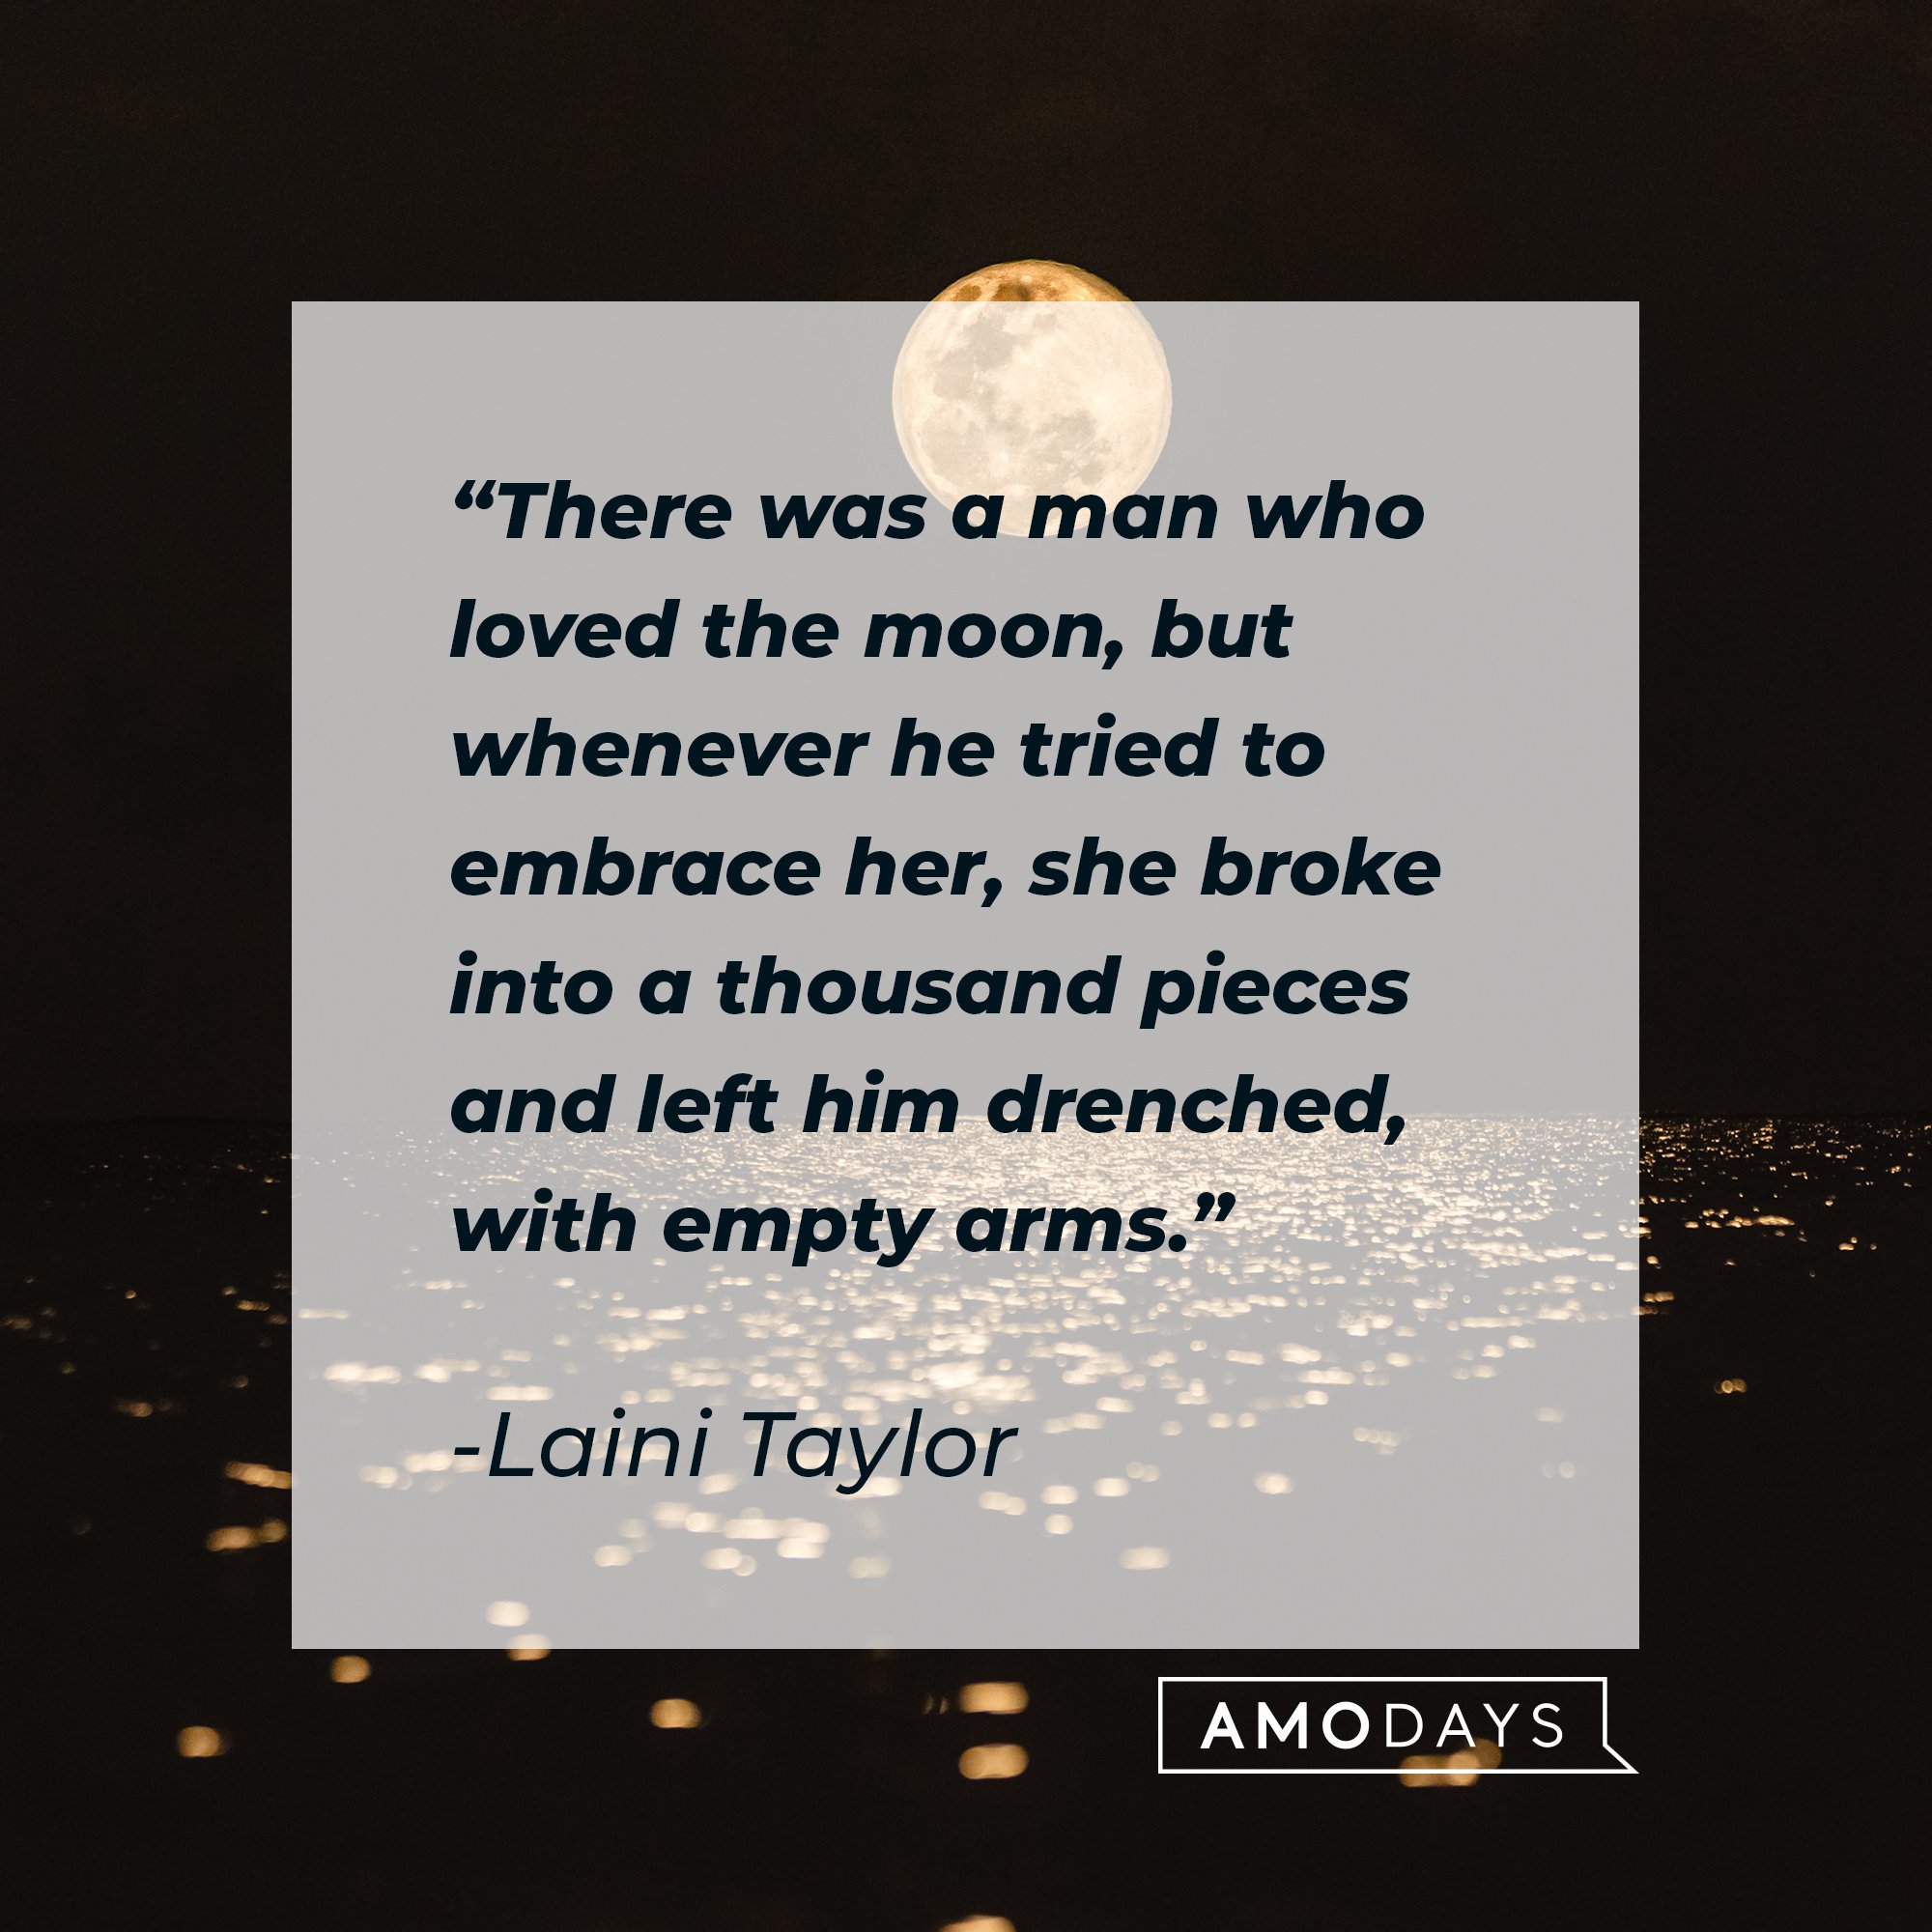 Laini Taylor’s quote: "There was a man who loved the moon, but whenever he tried to embrace her, she broke into a thousand pieces and left him drenched, with empty arms." | Image: AmoDays